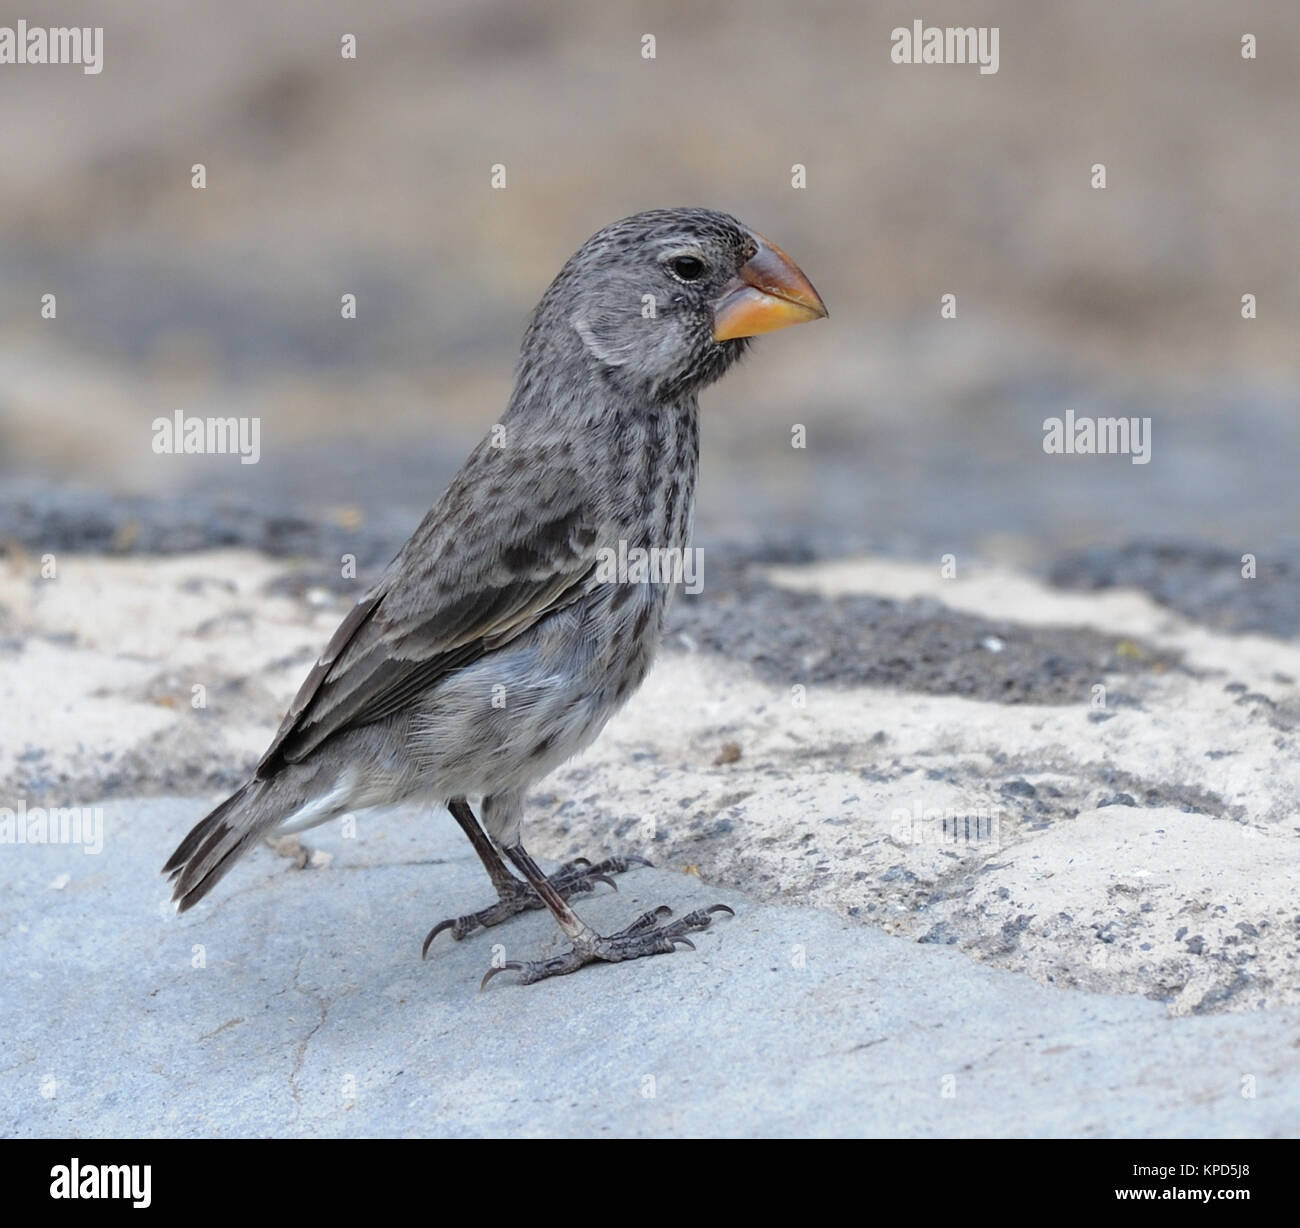 A female large ground finch (Geospiza magnirostris). This bird has an enormous beak and associated musculature, evolved to deal with large seeds. This Stock Photo